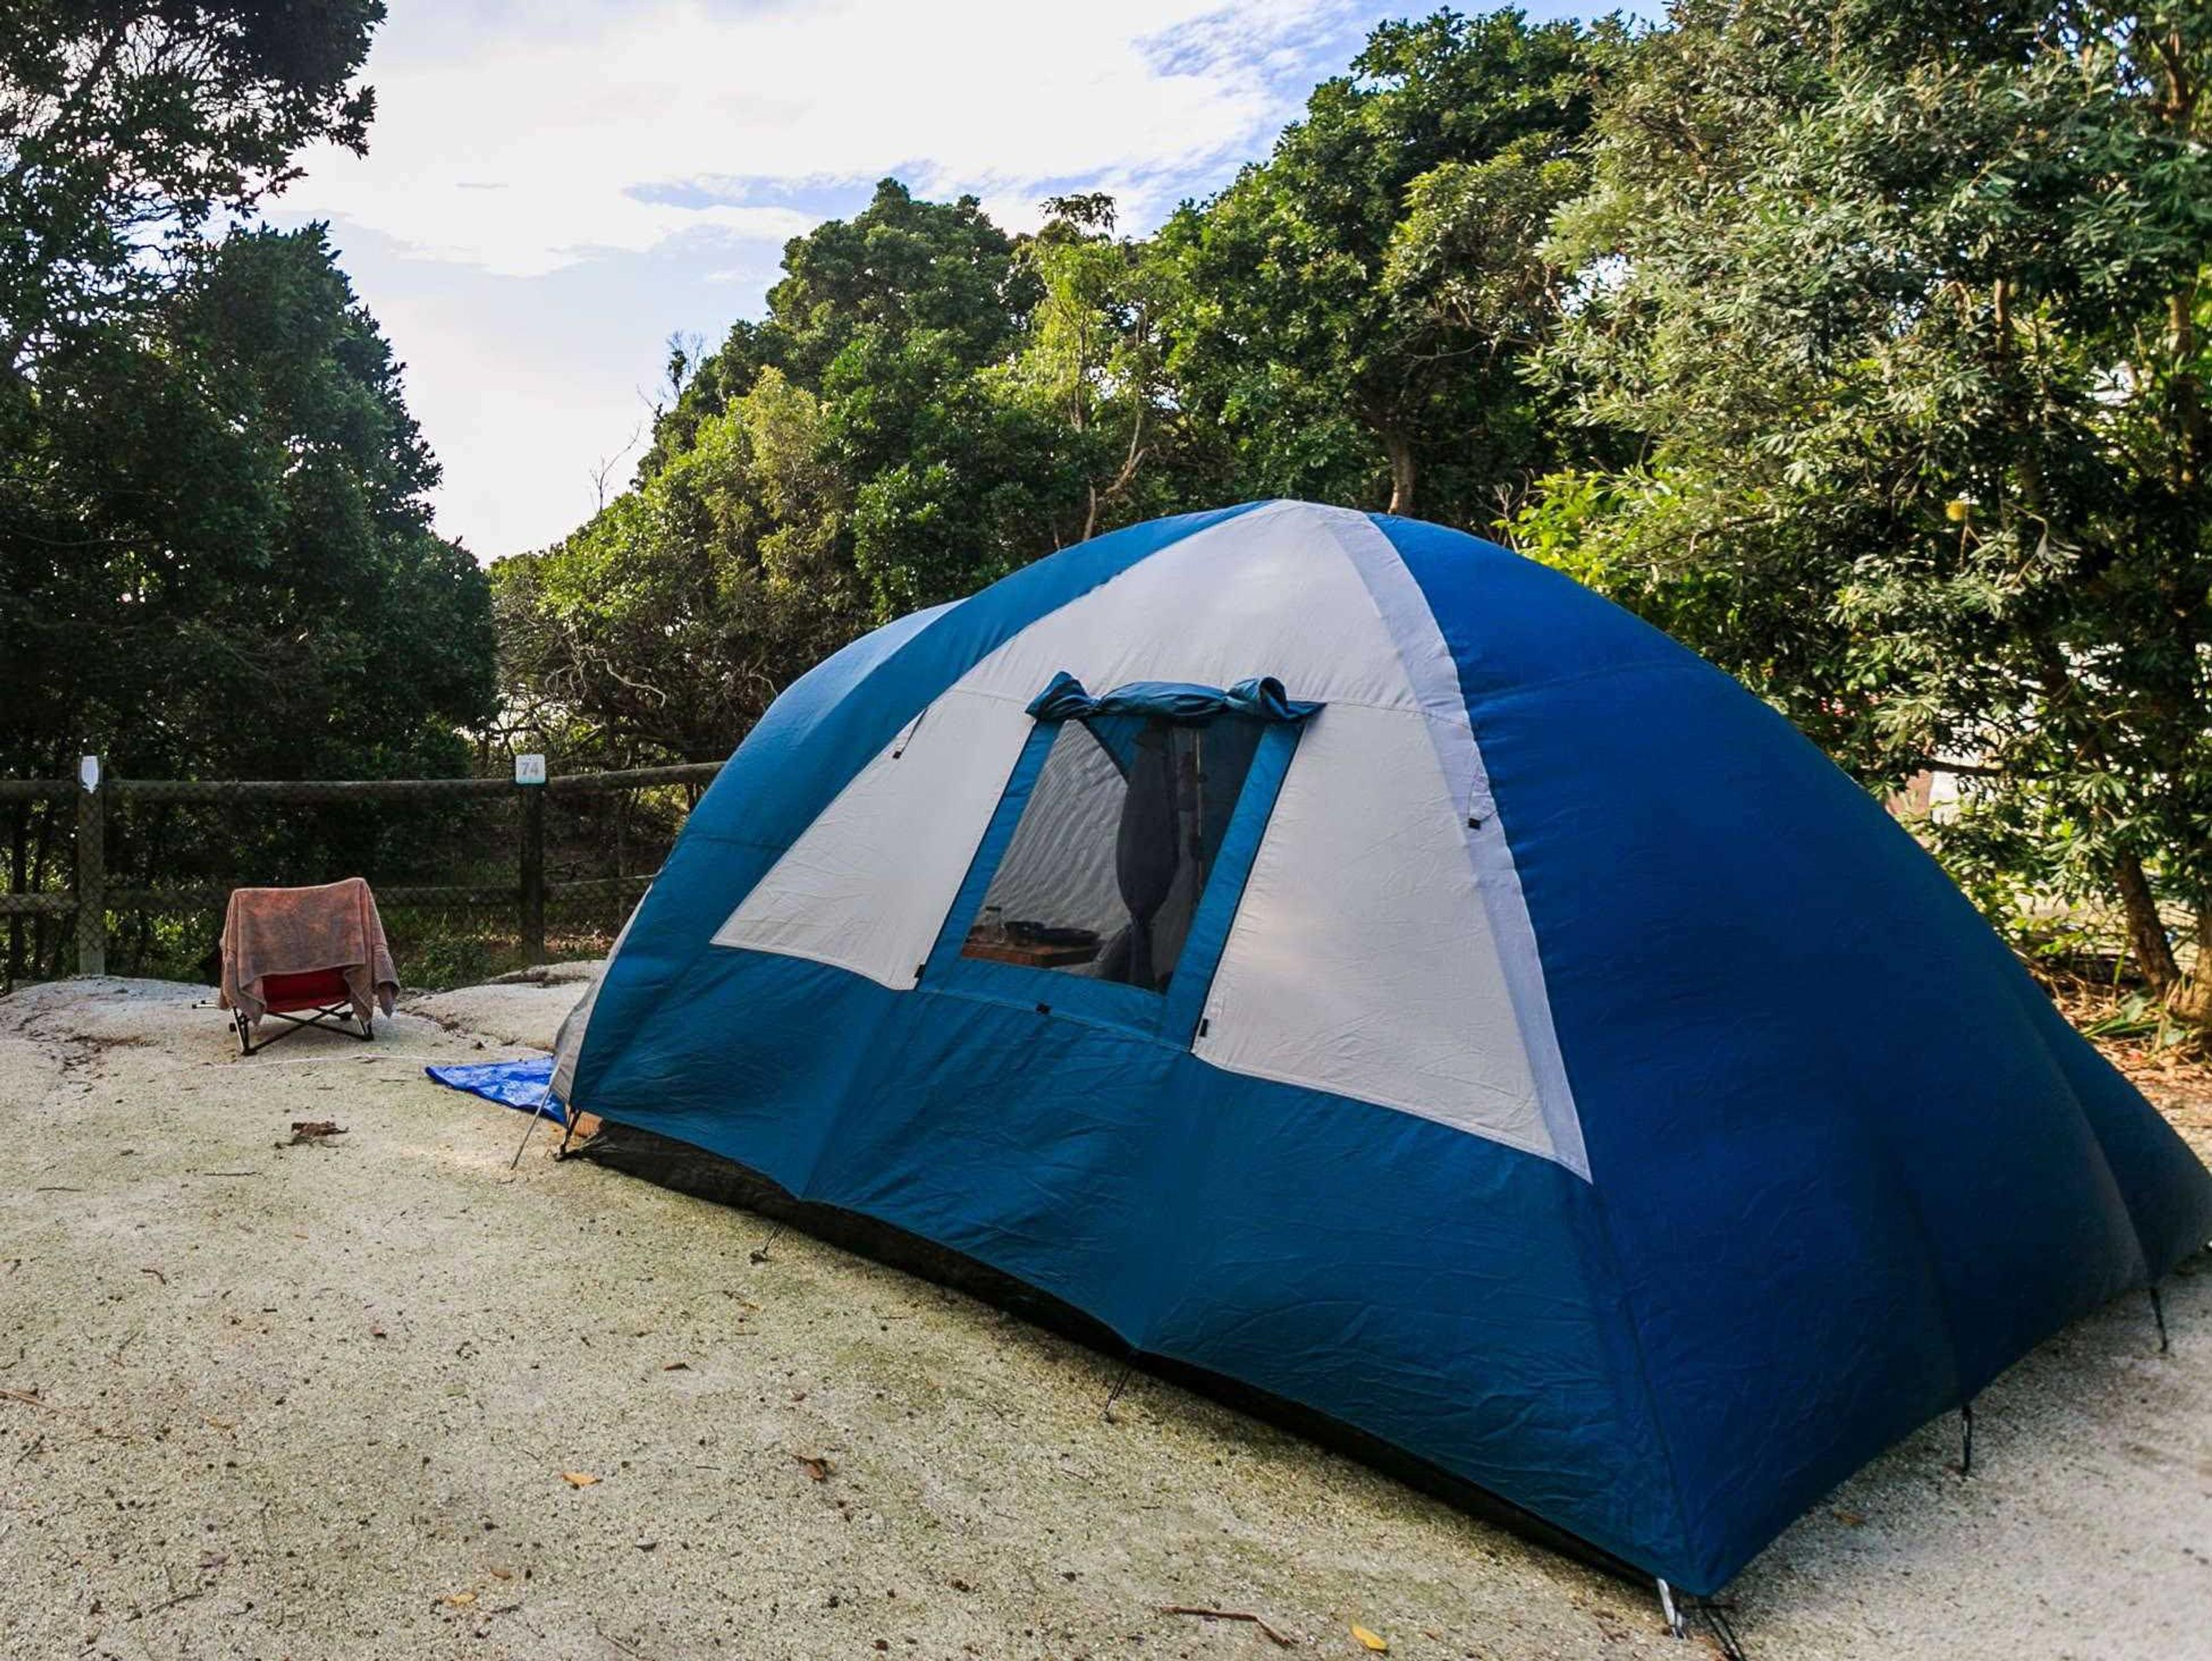 Byron Bay - Standard powered site - Tent